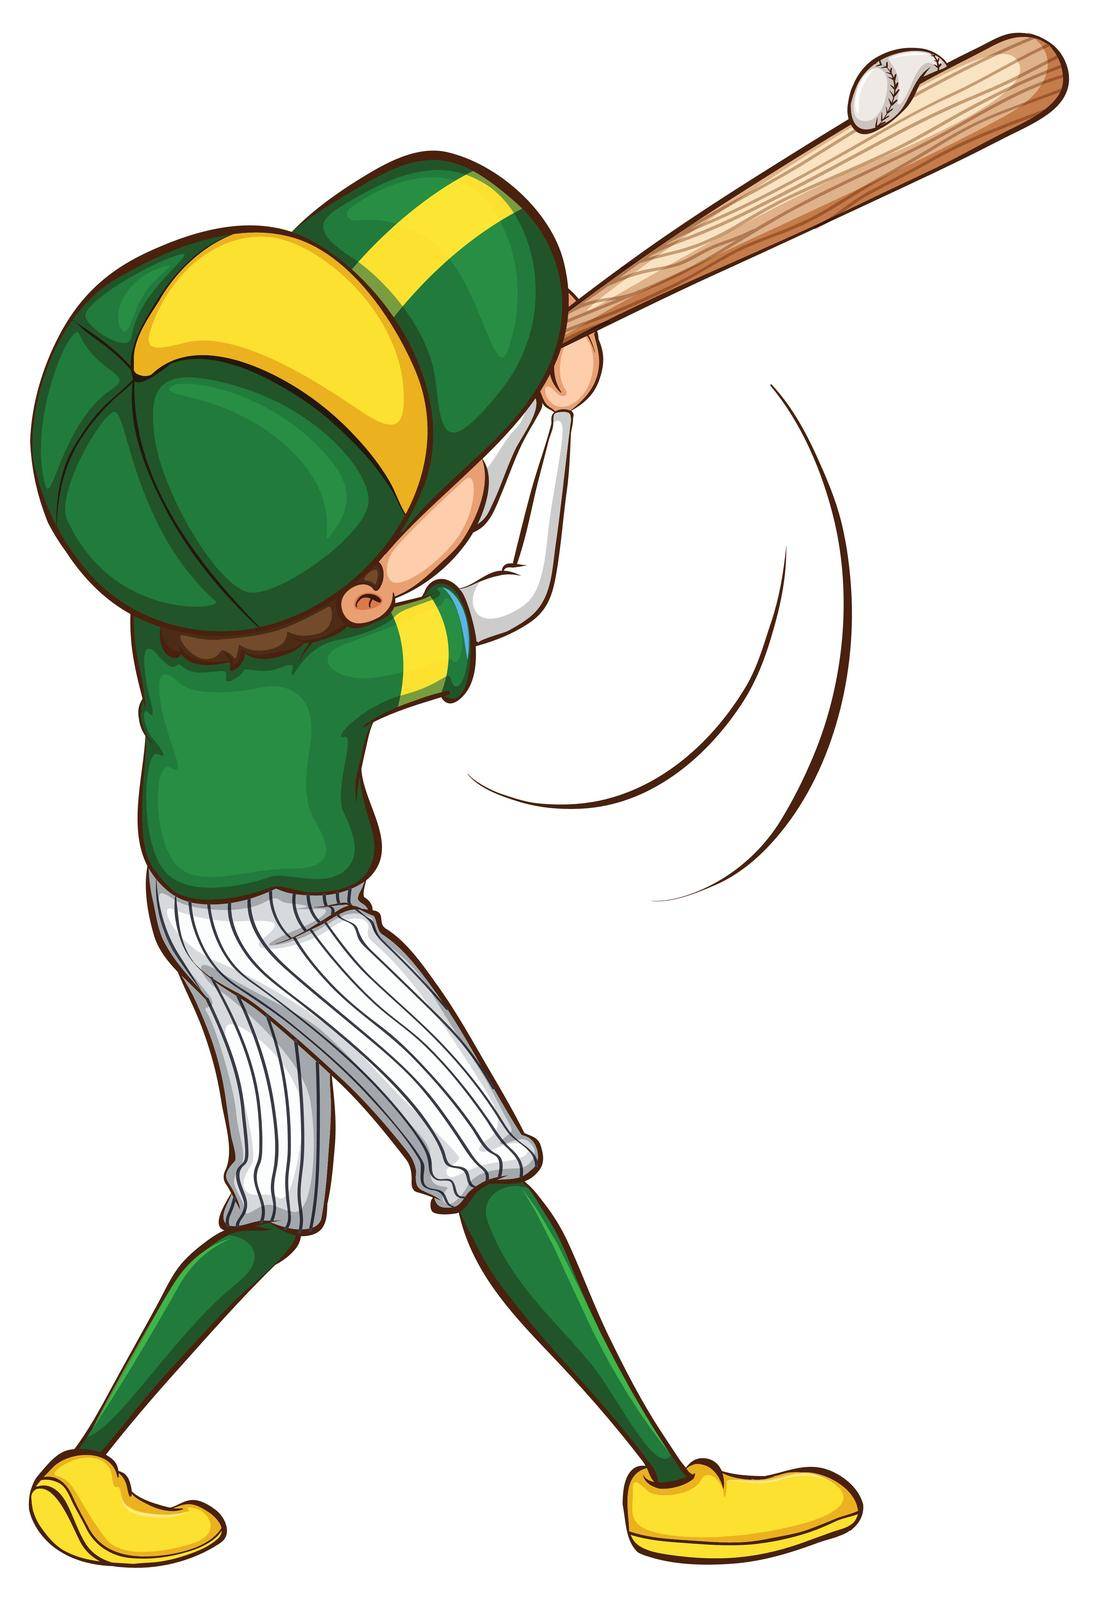 Illustration of a sketch of a baseball player in green uniform on a white background